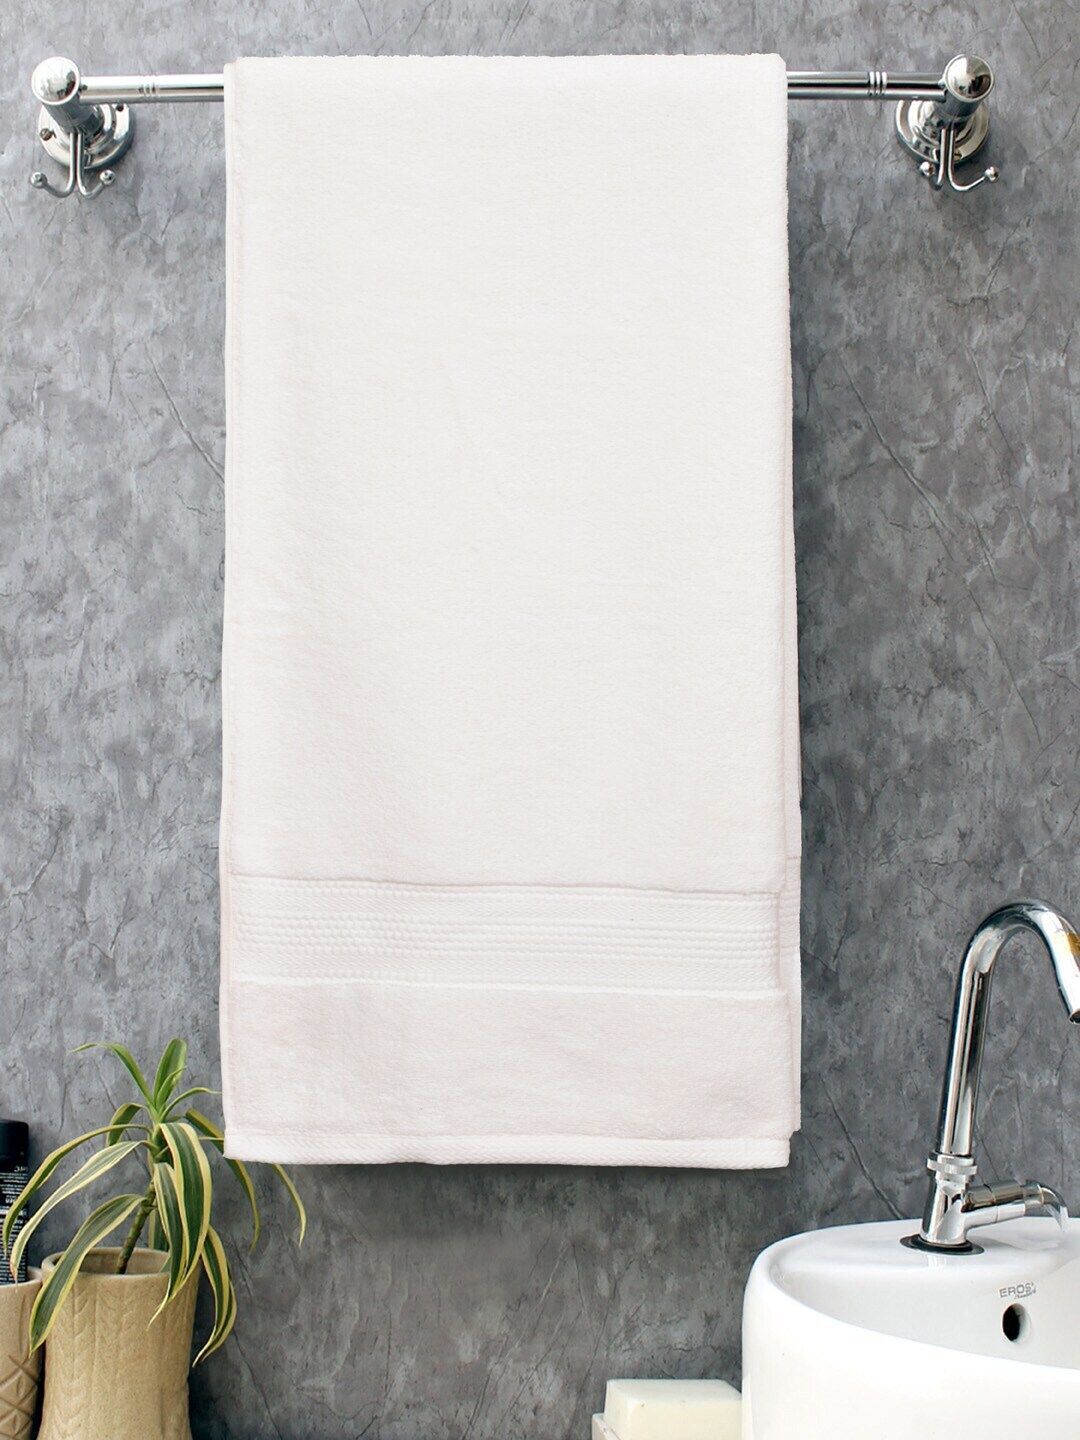 BOMBAY DYEING Cream-Colored Solid Cotton Bath Towel Price in India